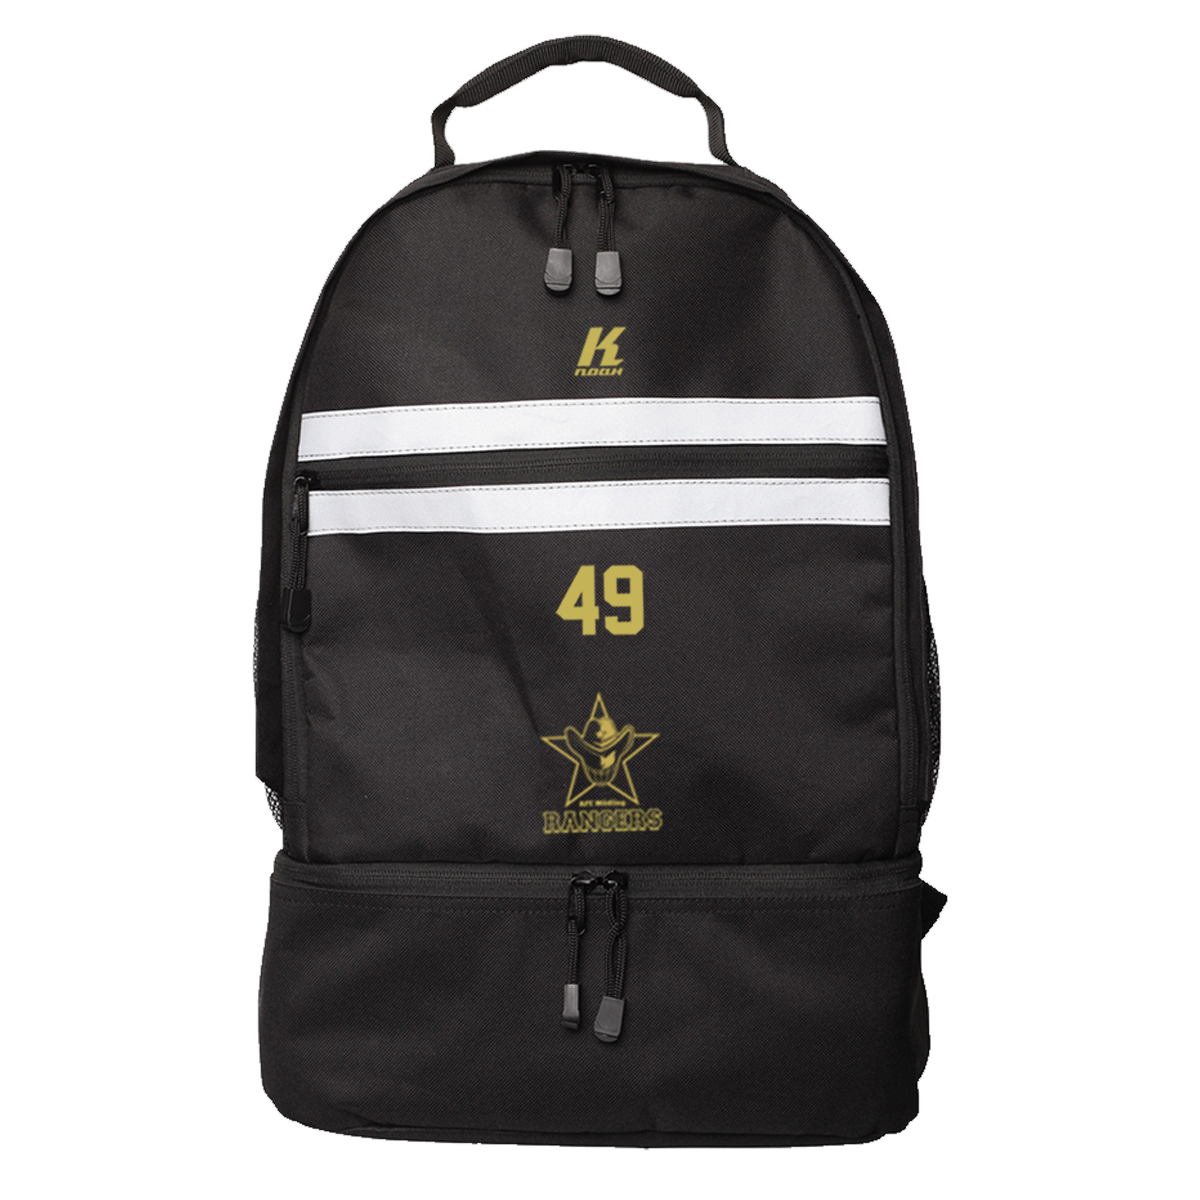 Rangers Players Backpack with Playernumber or Initials